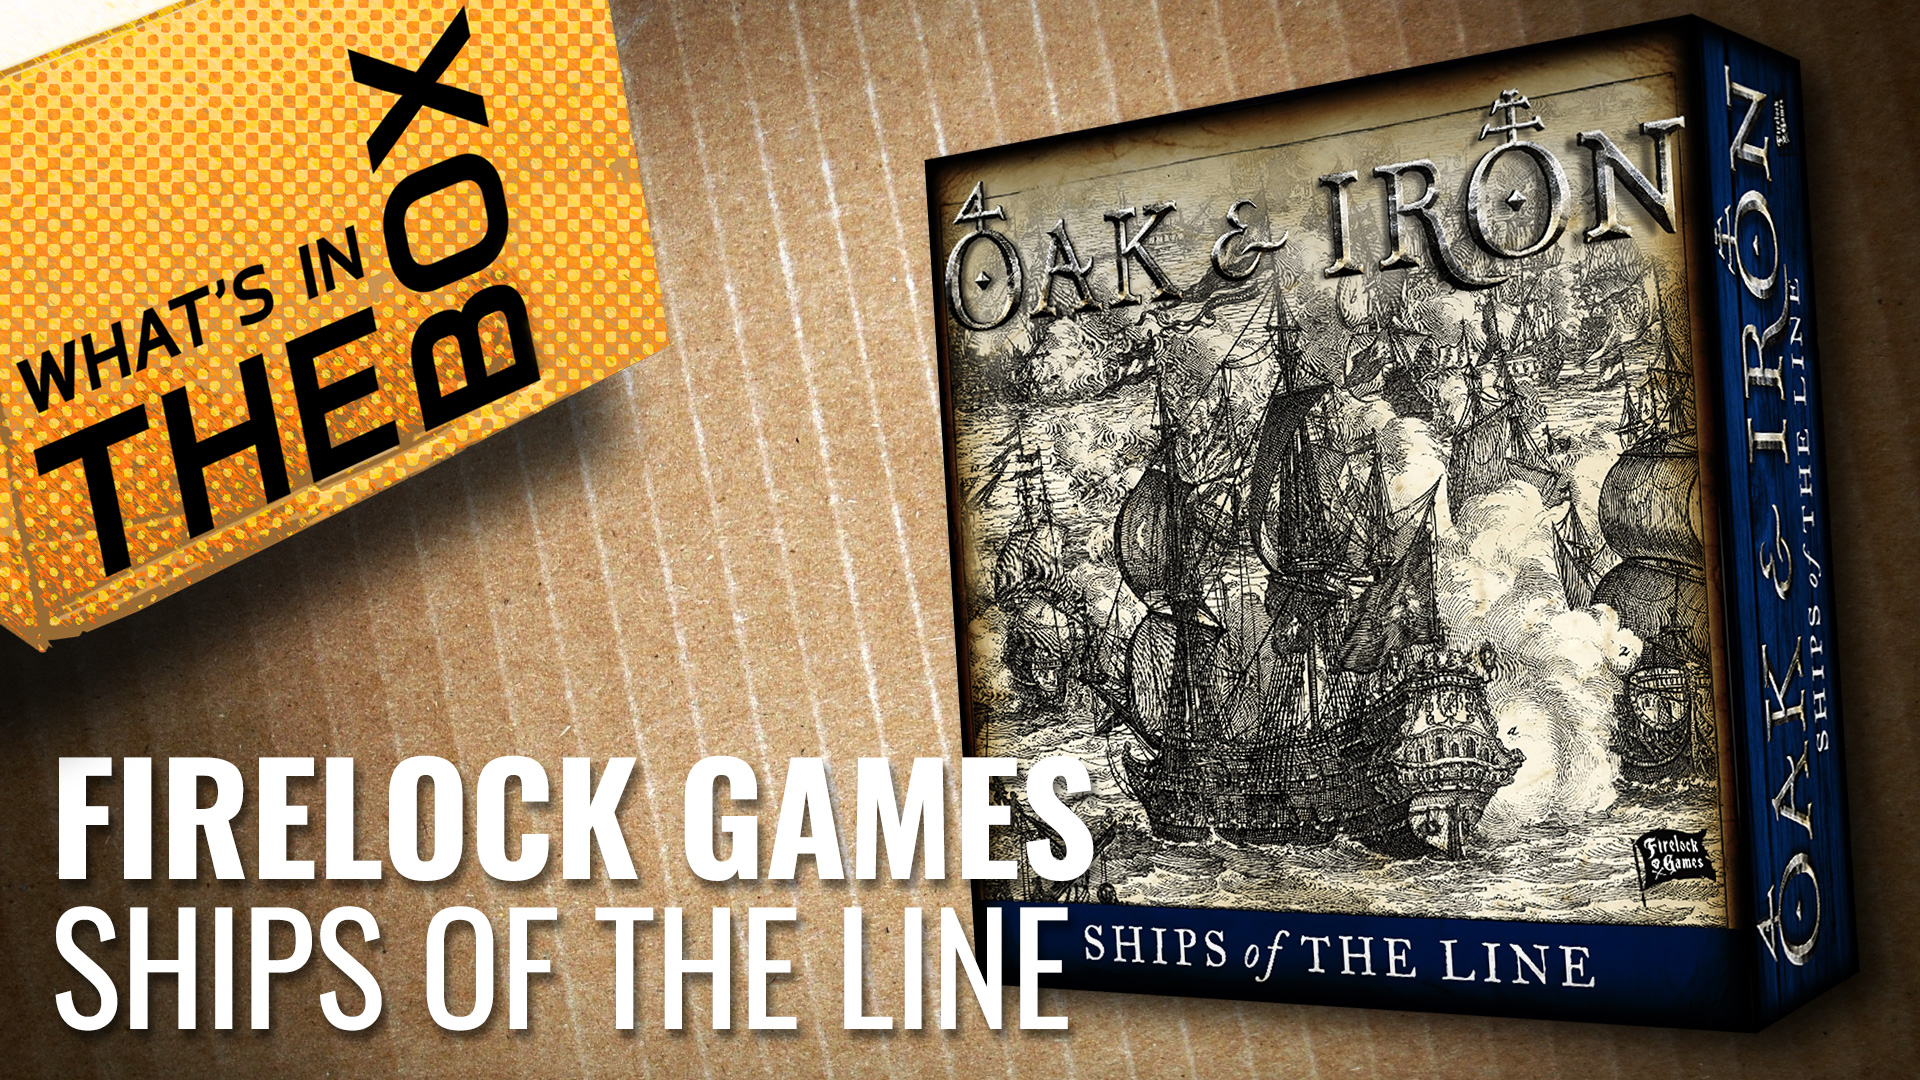 Unboxing---Firelock-Games-Ships-of-the-Line-coverimage